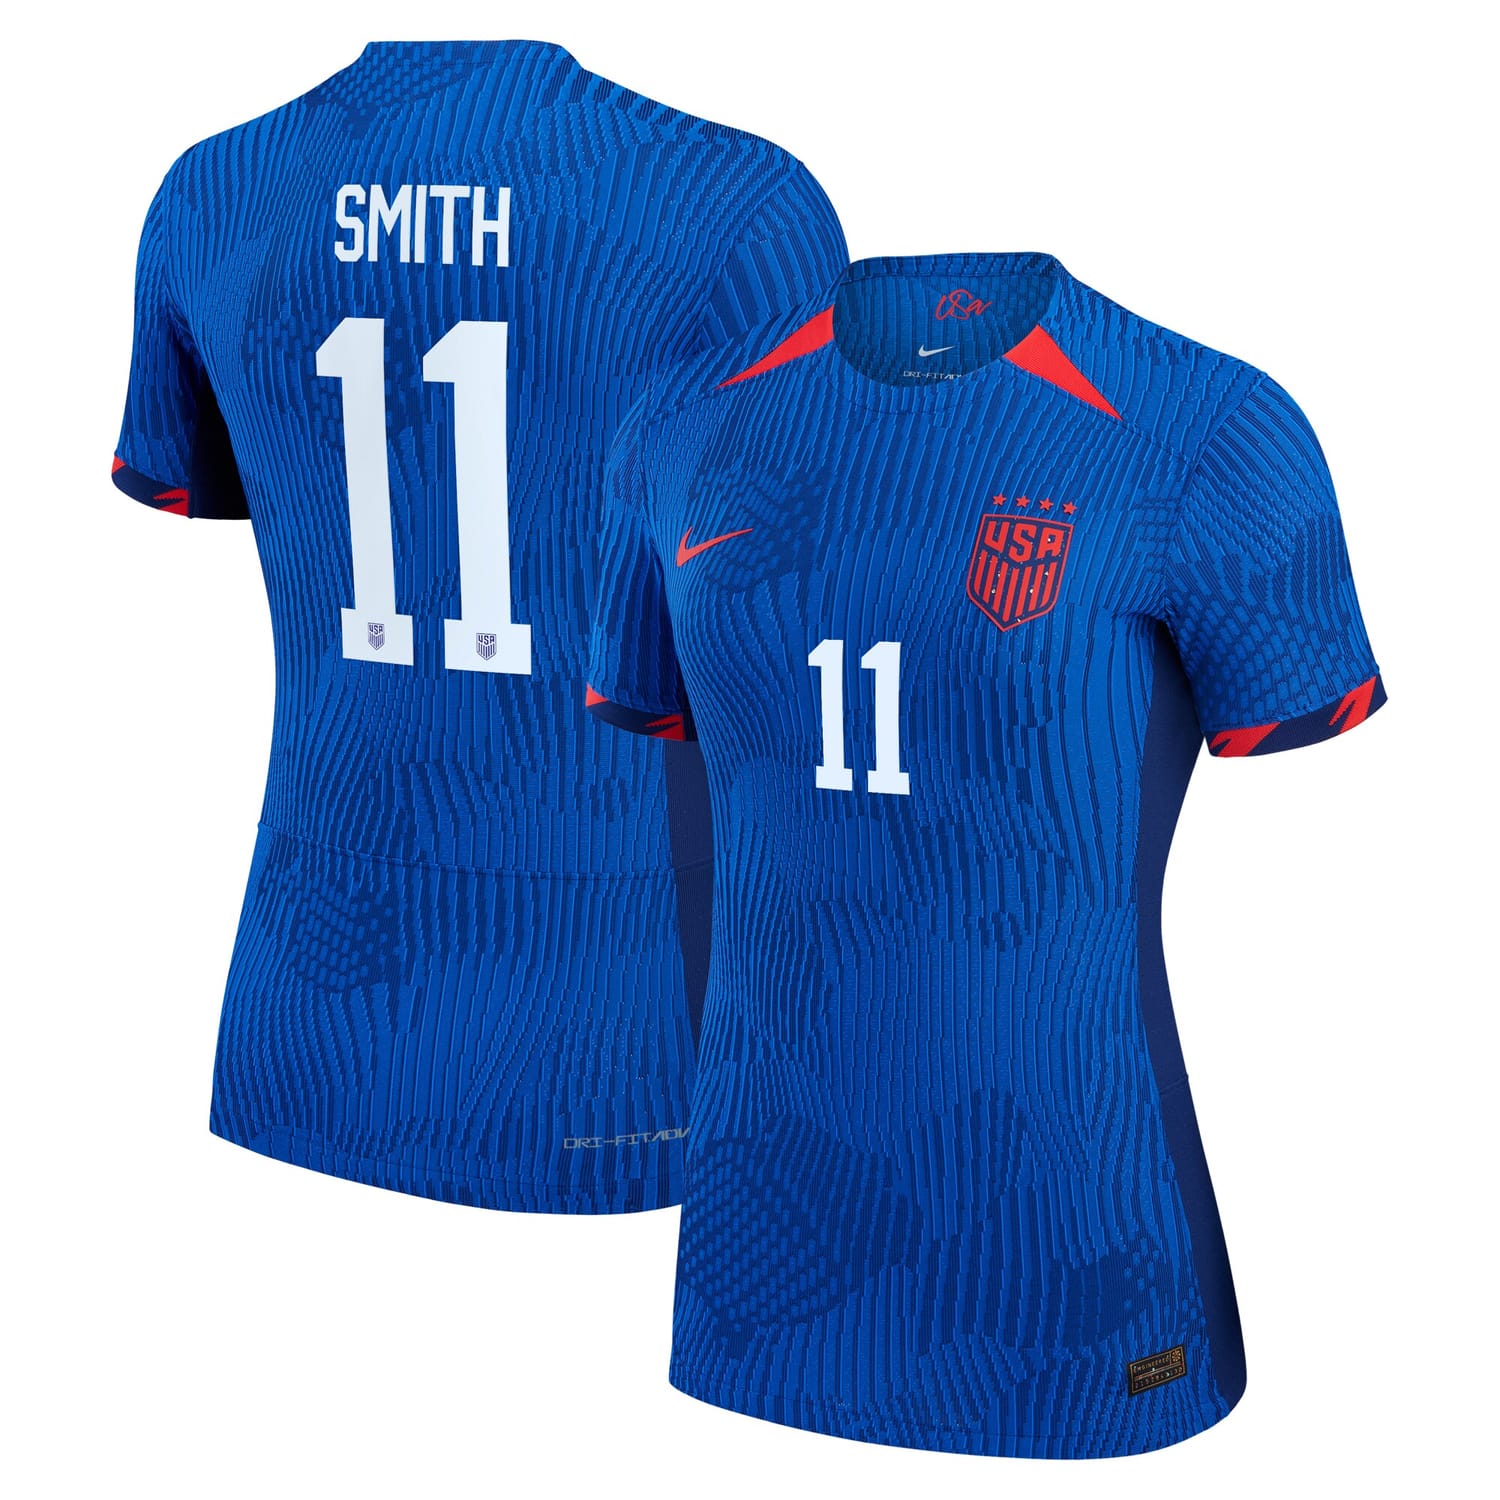 USWNT Away Authentic Jersey Shirt Royal 2023 player Sophia Smith printing for Women